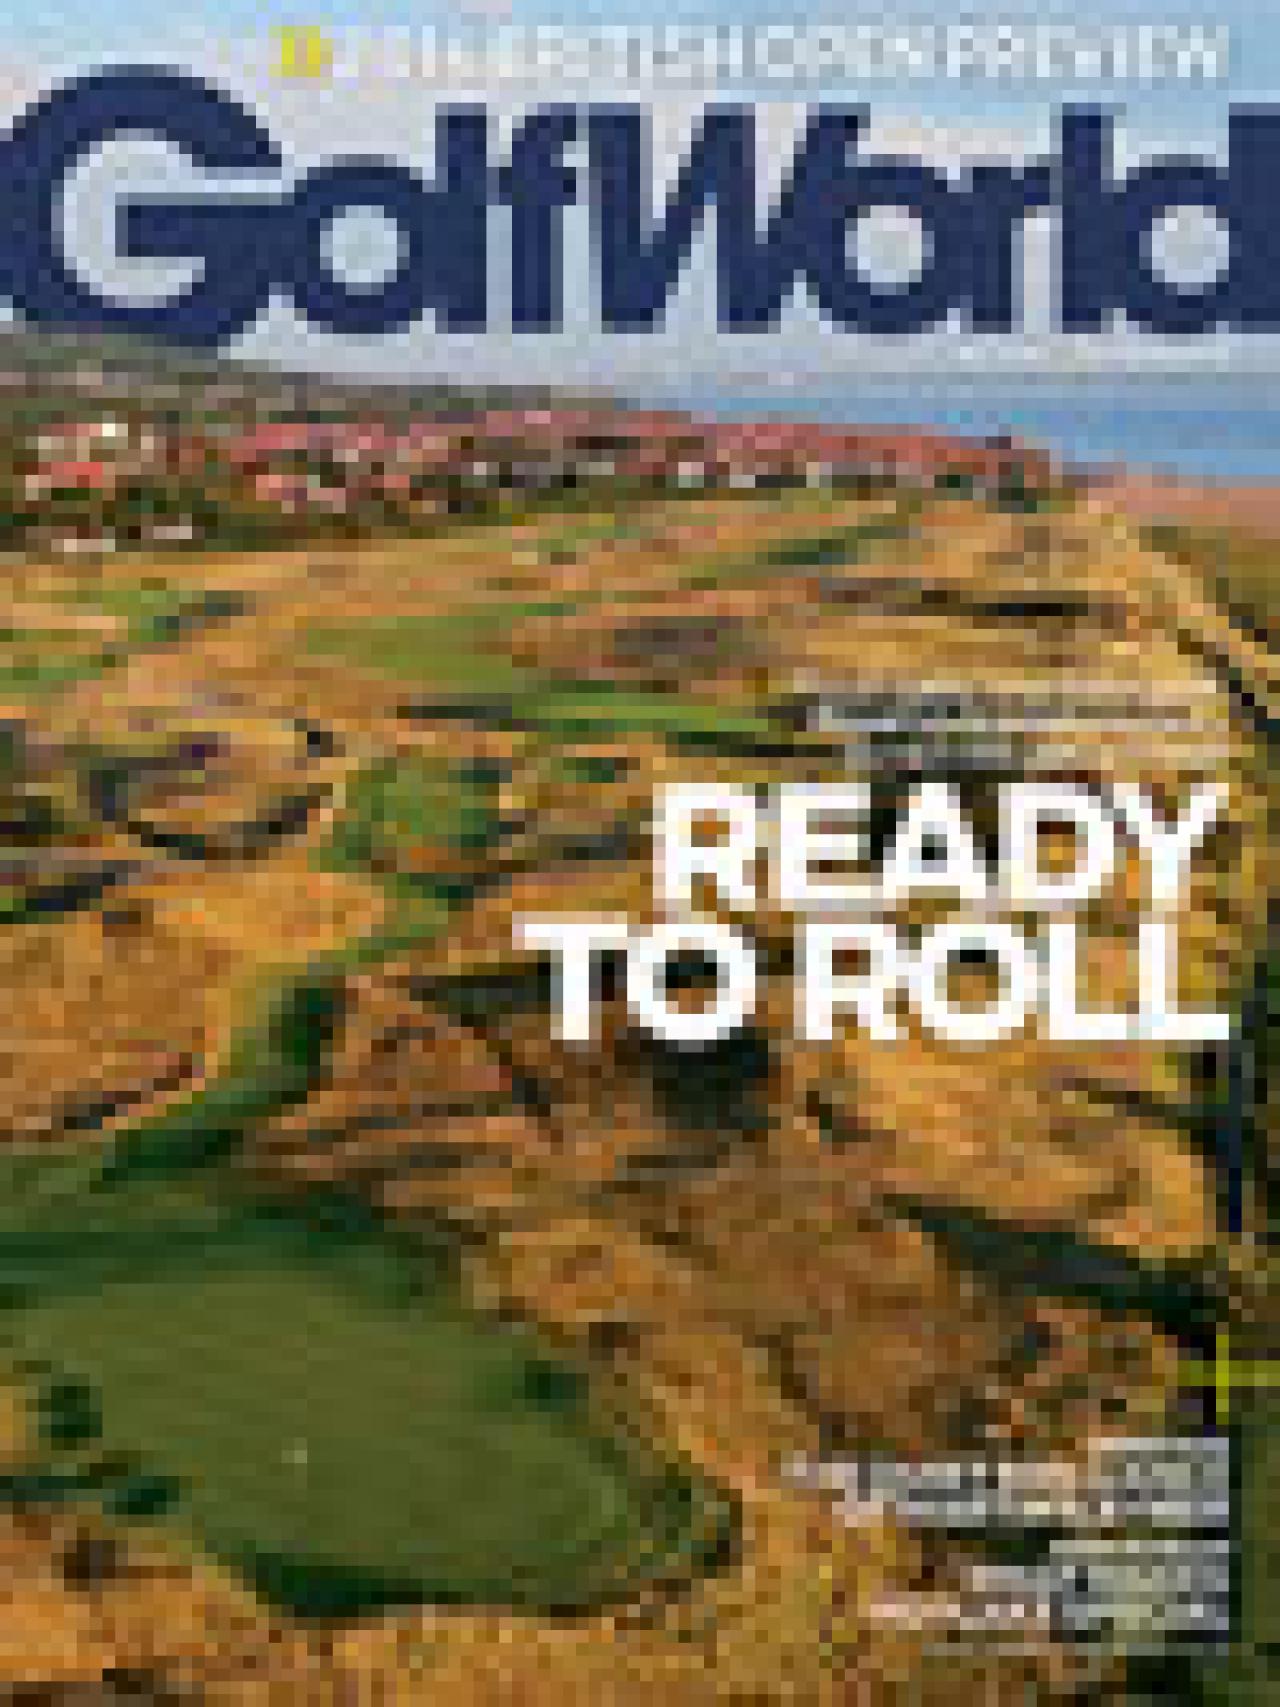 Archived Issues, Golf News and Tour Information